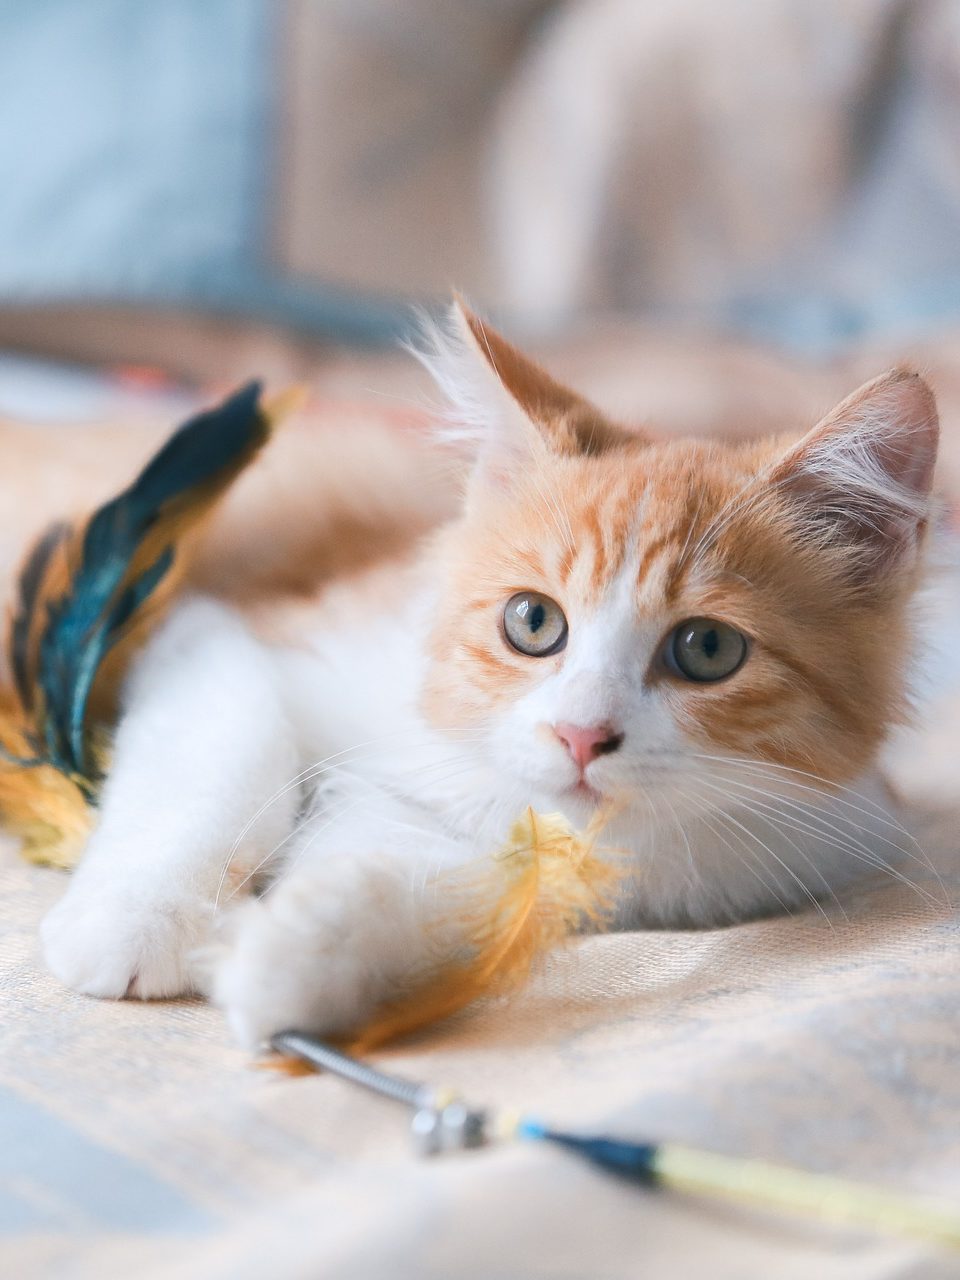 white and orange cat plating with a feather toy